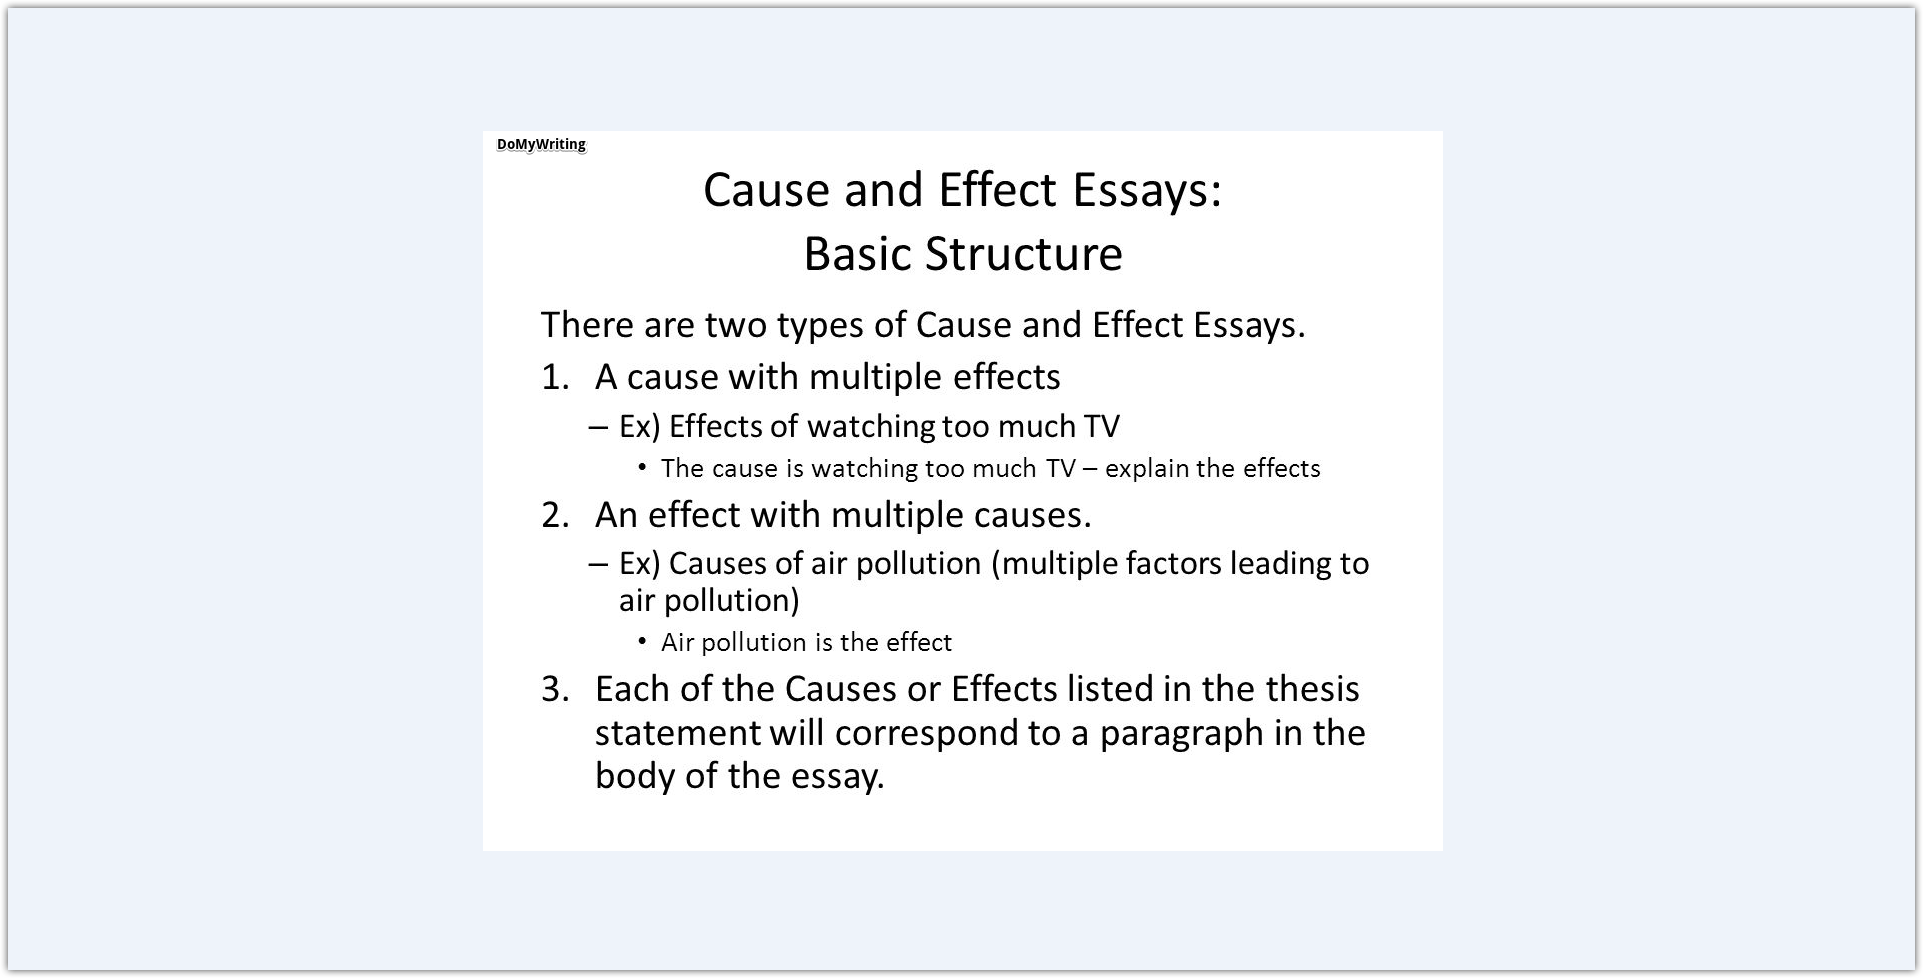 a cause and effect essay